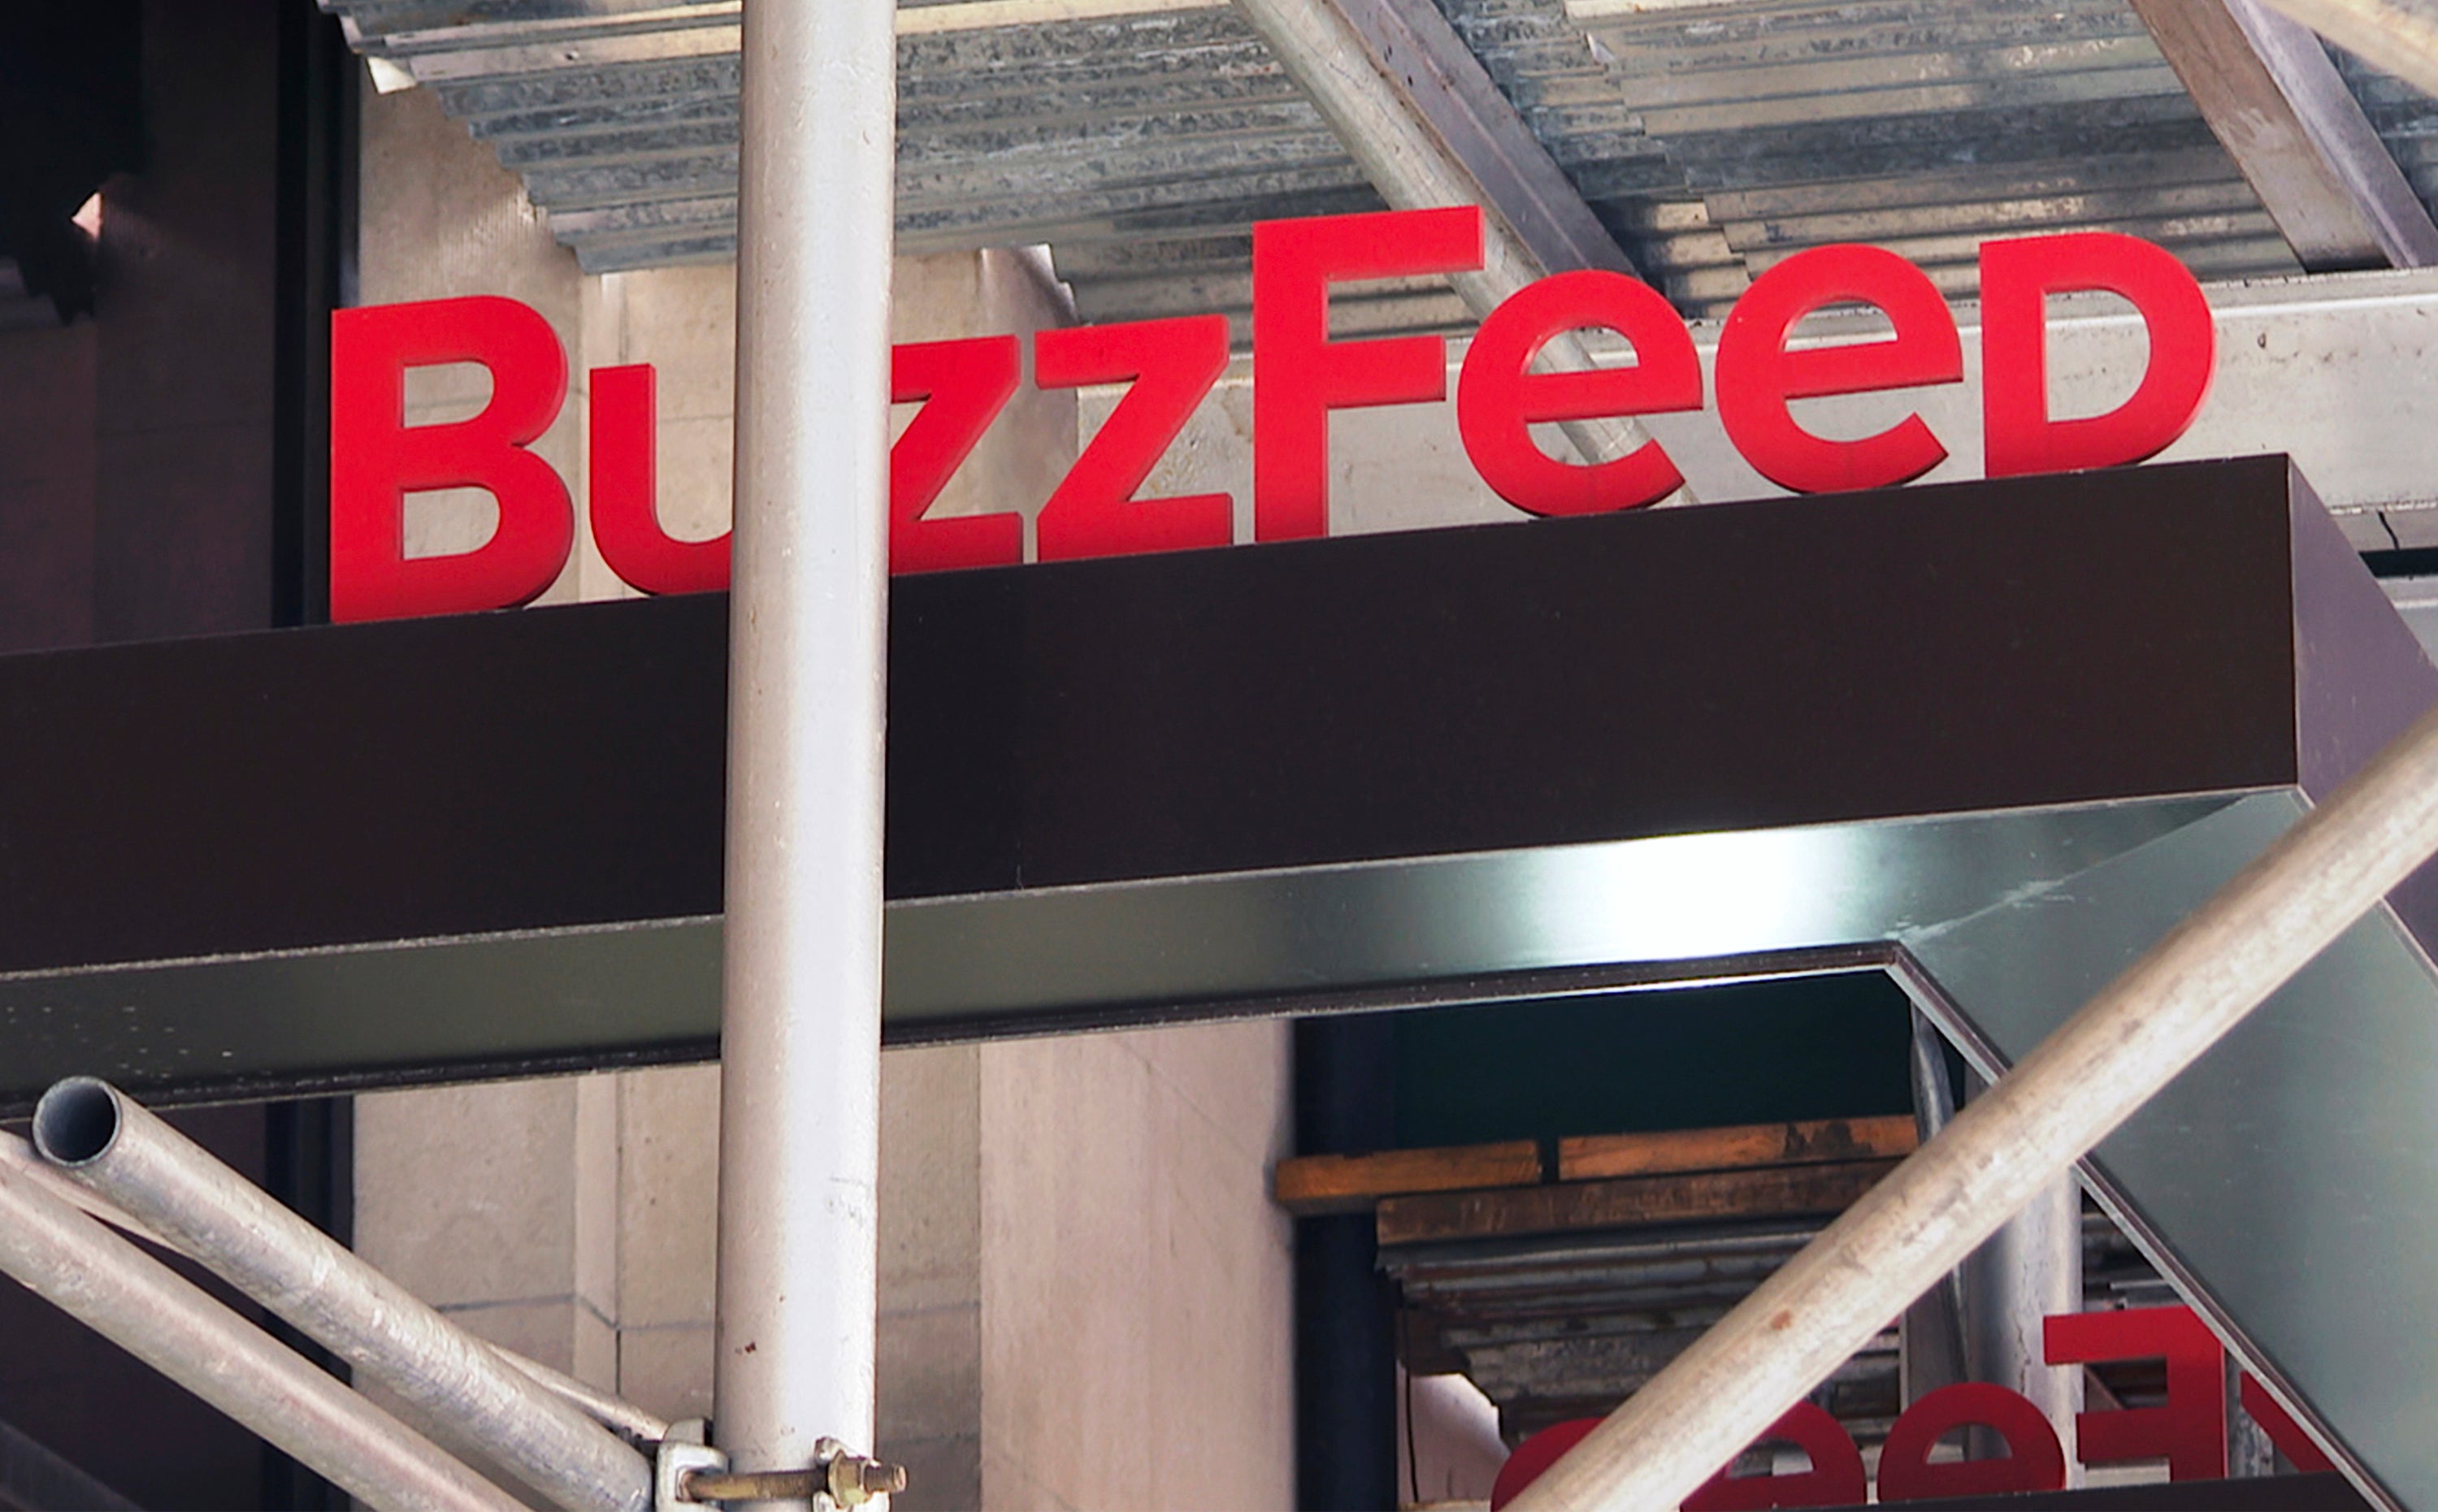 Buzzfeed News will be closed with the loss of 180 staff, the company announced on Thursday